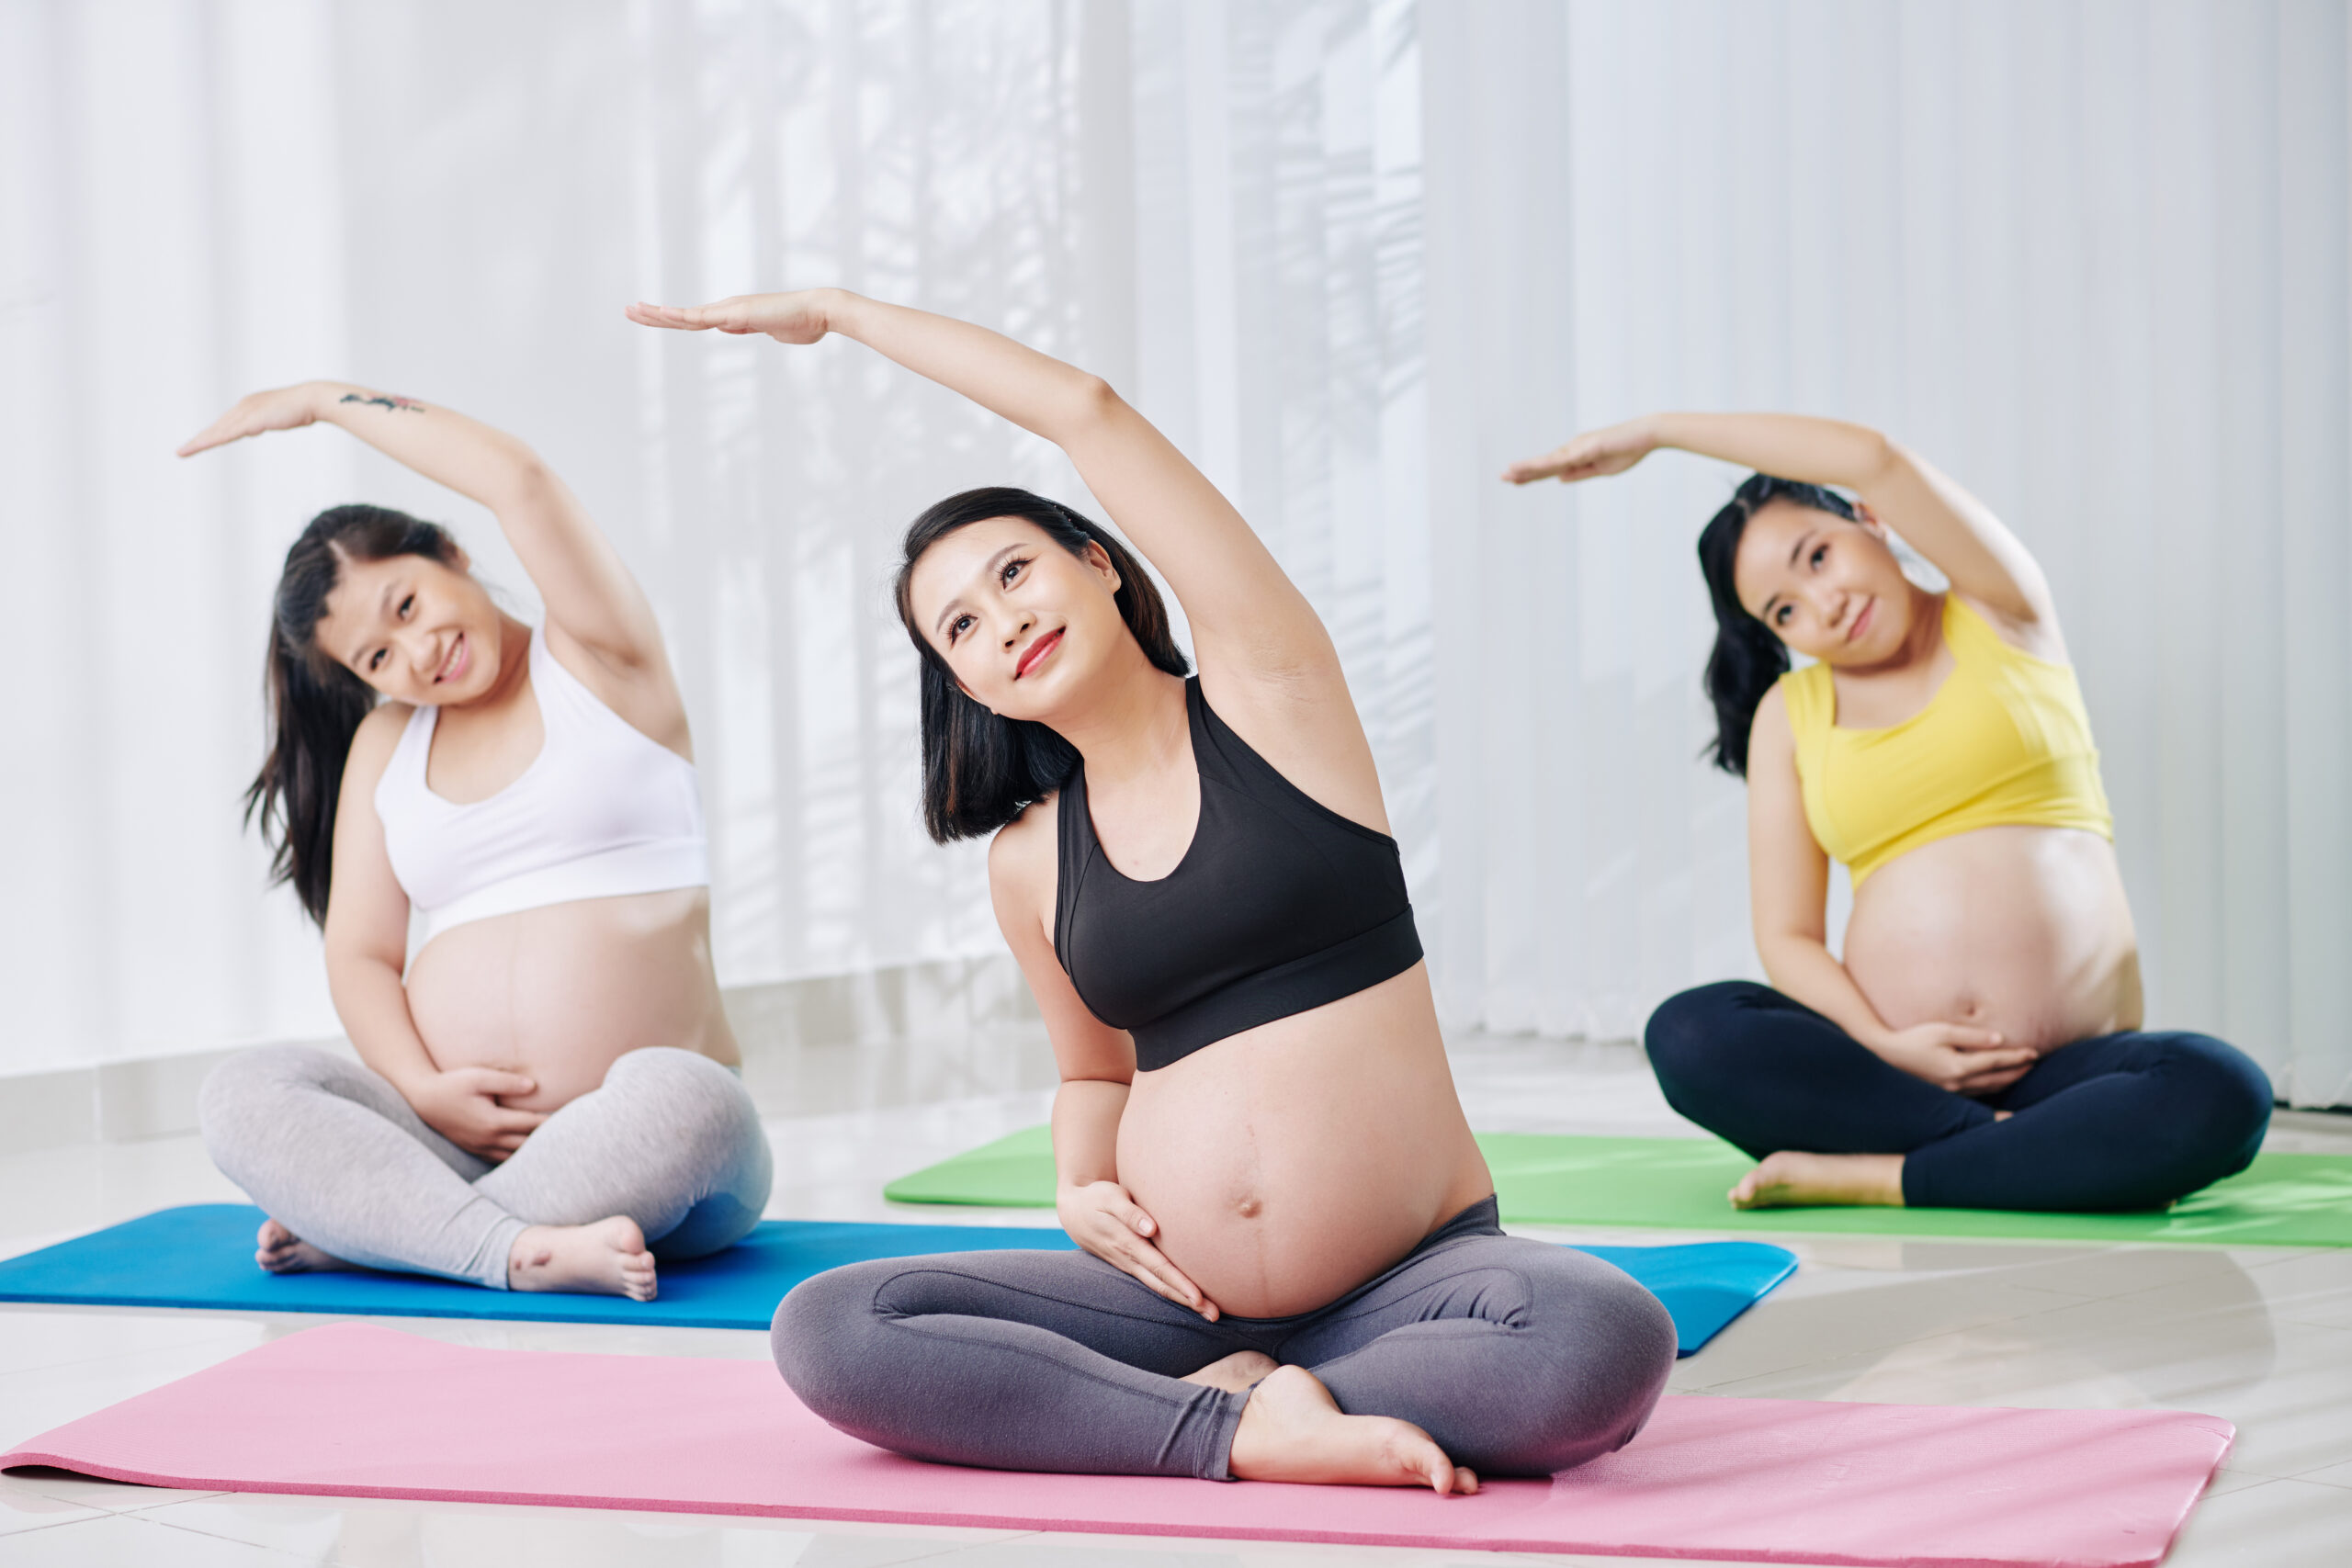 pregnant women doing side bends 2021 08 29 18 04 05 utc scaled